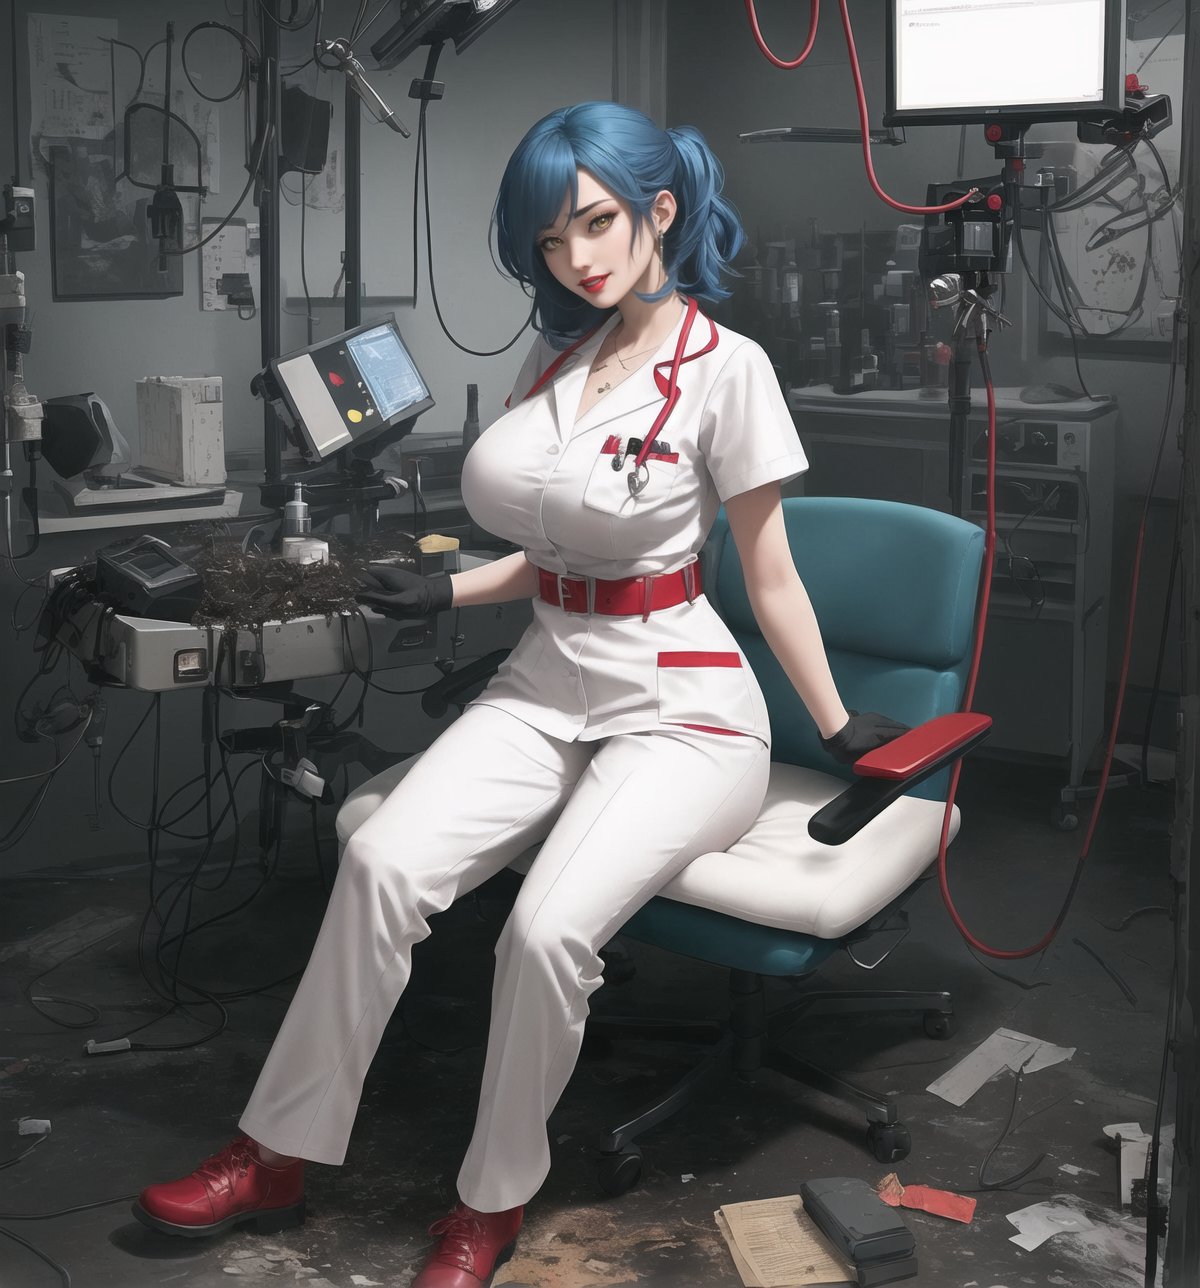 An ultra-detailed 16K masterpiece with ((horror and macabre styles)), rendered in ultra-high resolution with graphic detail. | Aria, a 32-year-old woman, is dressed in a doctor's outfit, consisting of a white shirt, green pants and a surgical gown. She is also wearing a surgical mask, latex gloves and rubber boots. Her blue hair is short and unkempt, with a few locks tucked behind her ears. She has yellow eyes, looking at the viewer while smiling sensually, showing her teeth and wearing red lipstick. It is located in a macabre operating room, with filthy hospital structures, metal structures, destroyed machines and a macabre and filthy environment. The scene is lit by fluorescent lights, creating eerie shadows on the walls. There are surgical instruments scattered around the place, creating an environment of tension and fear. | The image highlights Aria's sensual figure and the macabre elements of the operating room, as well as the detailed textures on the structures, instruments and machines. | Dark and sinister lighting effects create a frightening and tense atmosphere, while Aria's sensual pose adds a seductive touch to the image. | A horror and seductive scene of a female doctor in a macabre operating room, exploring themes of fear, tension and sensuality. | (((The image reveals a full-body shot as Aria assumes a sensual pose, engagingly leaning against a structure within the scene in an exciting manner. She takes on a sensual pose as she interacts, boldly leaning on a structure, leaning back and boldly throwing herself onto the structure, reclining back in an exhilarating way.))). | ((((full-body shot)))), ((perfect pose)), ((perfect limbs, perfect fingers, better hands, perfect hands)), ((perfect legs, perfect feet)), ((huge breasts)), ((perfect design)), ((perfect composition)), ((very detailed scene, very detailed background, perfect layout, correct imperfections)), Enhance++, Ultra details++, More Detail++